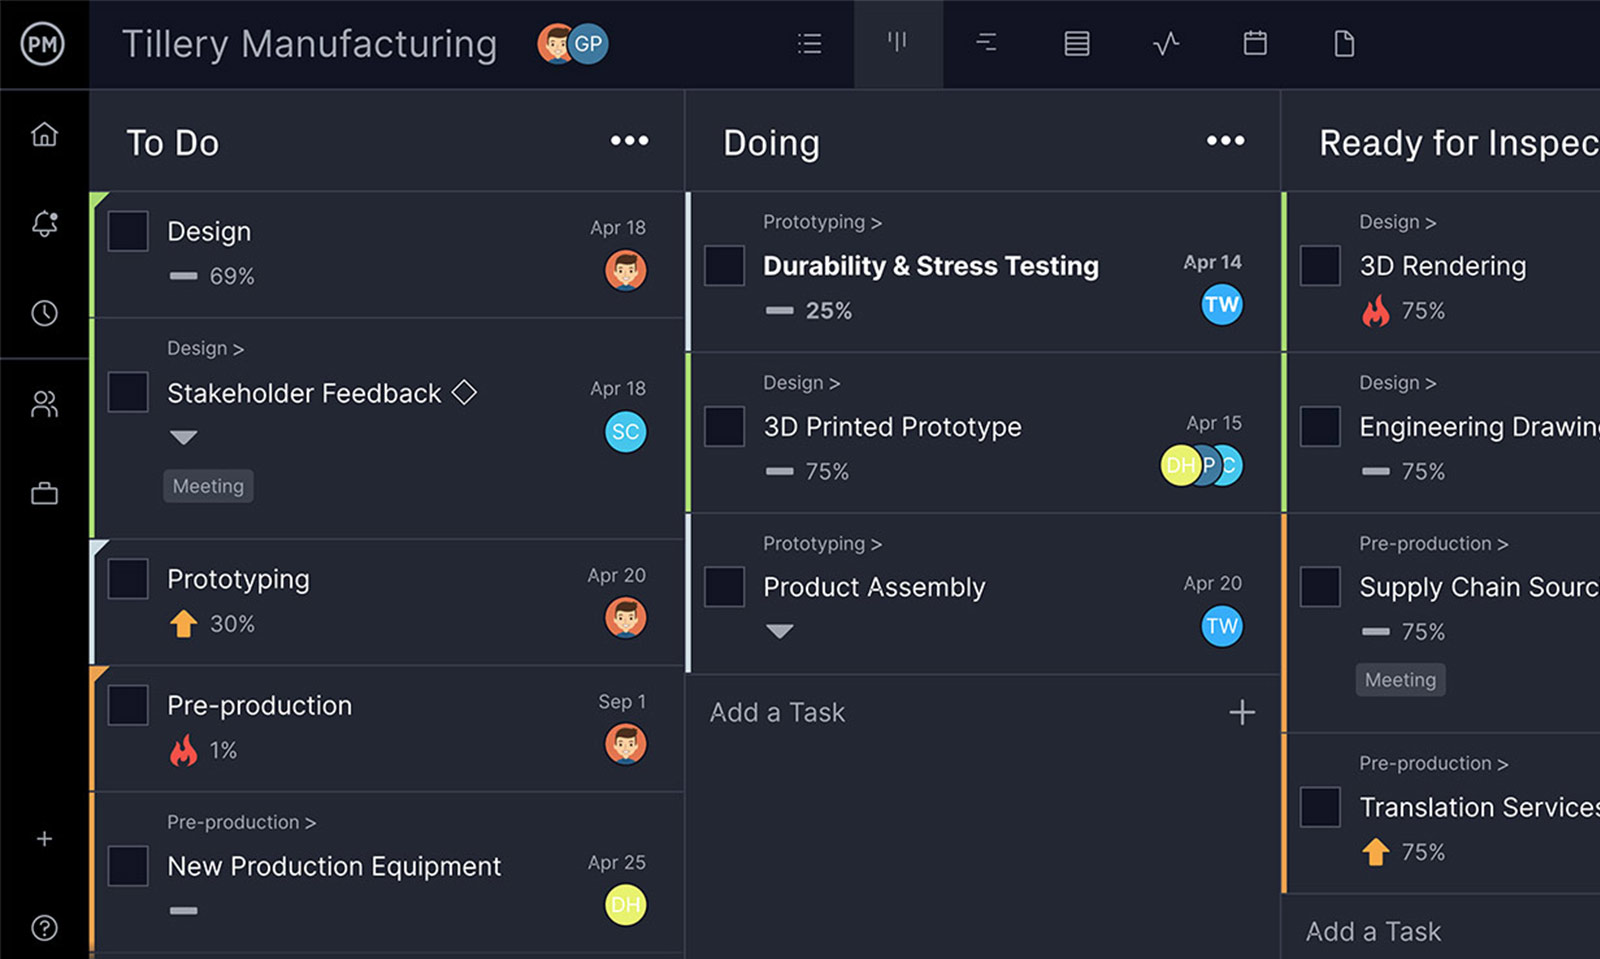 ProjectManager's project planning software showing a kanban board for a manufacturing project